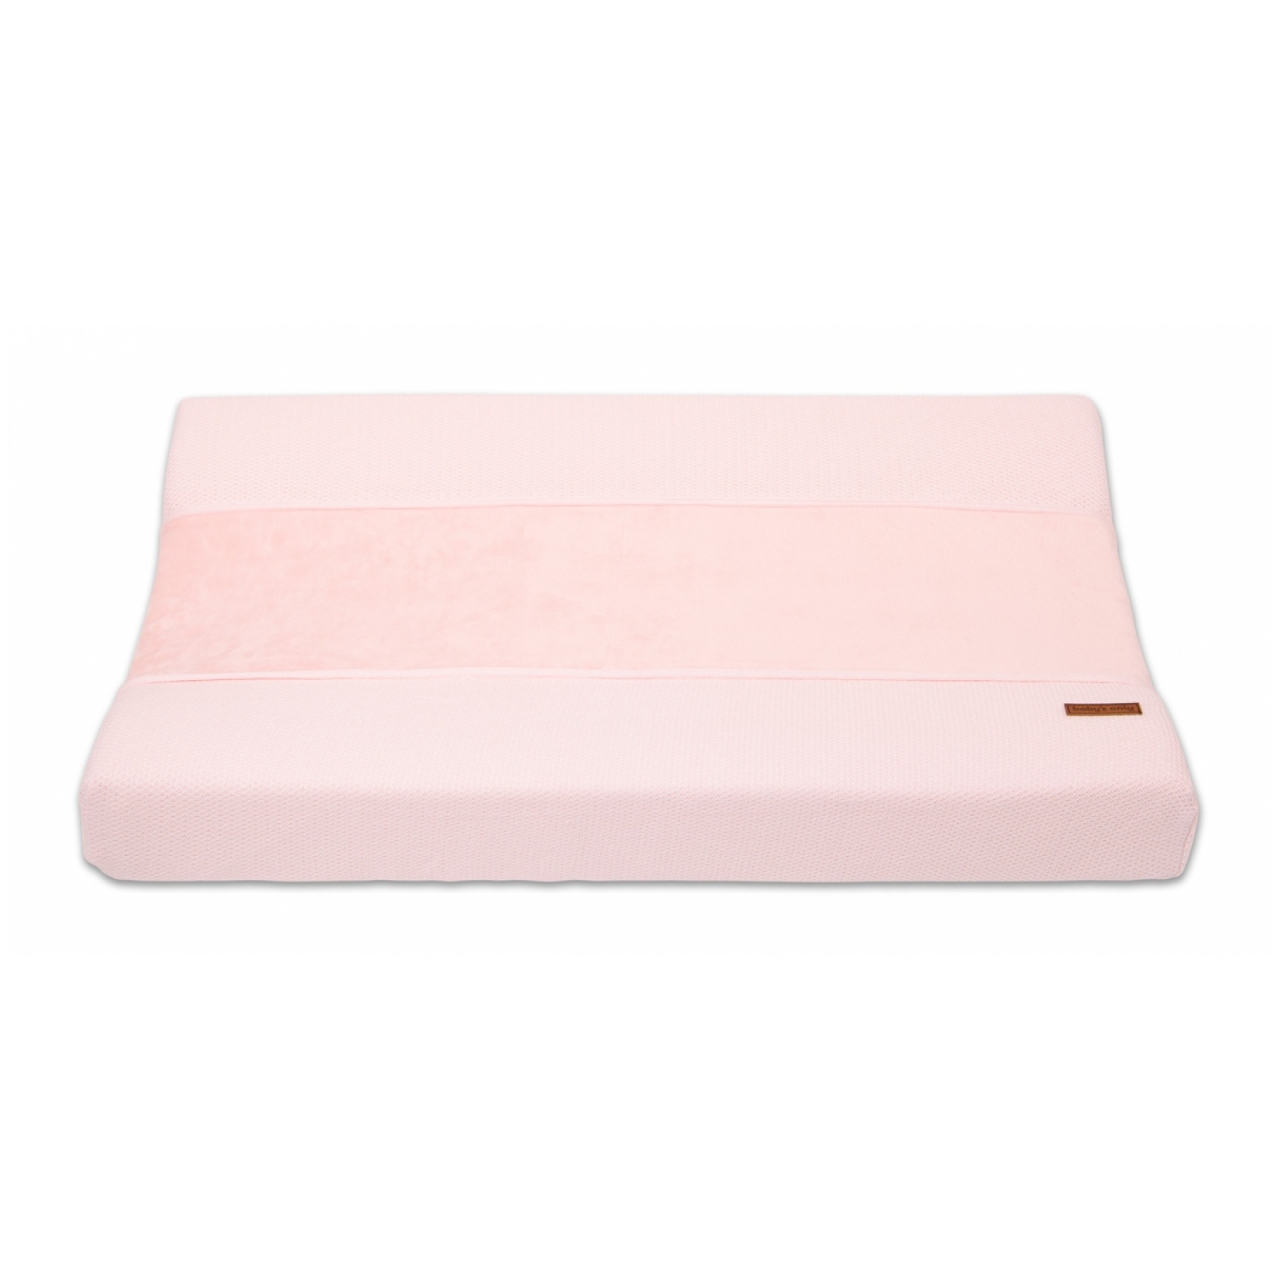 Baby's Only Classic Changing Pad Cover - 45x70 cm.